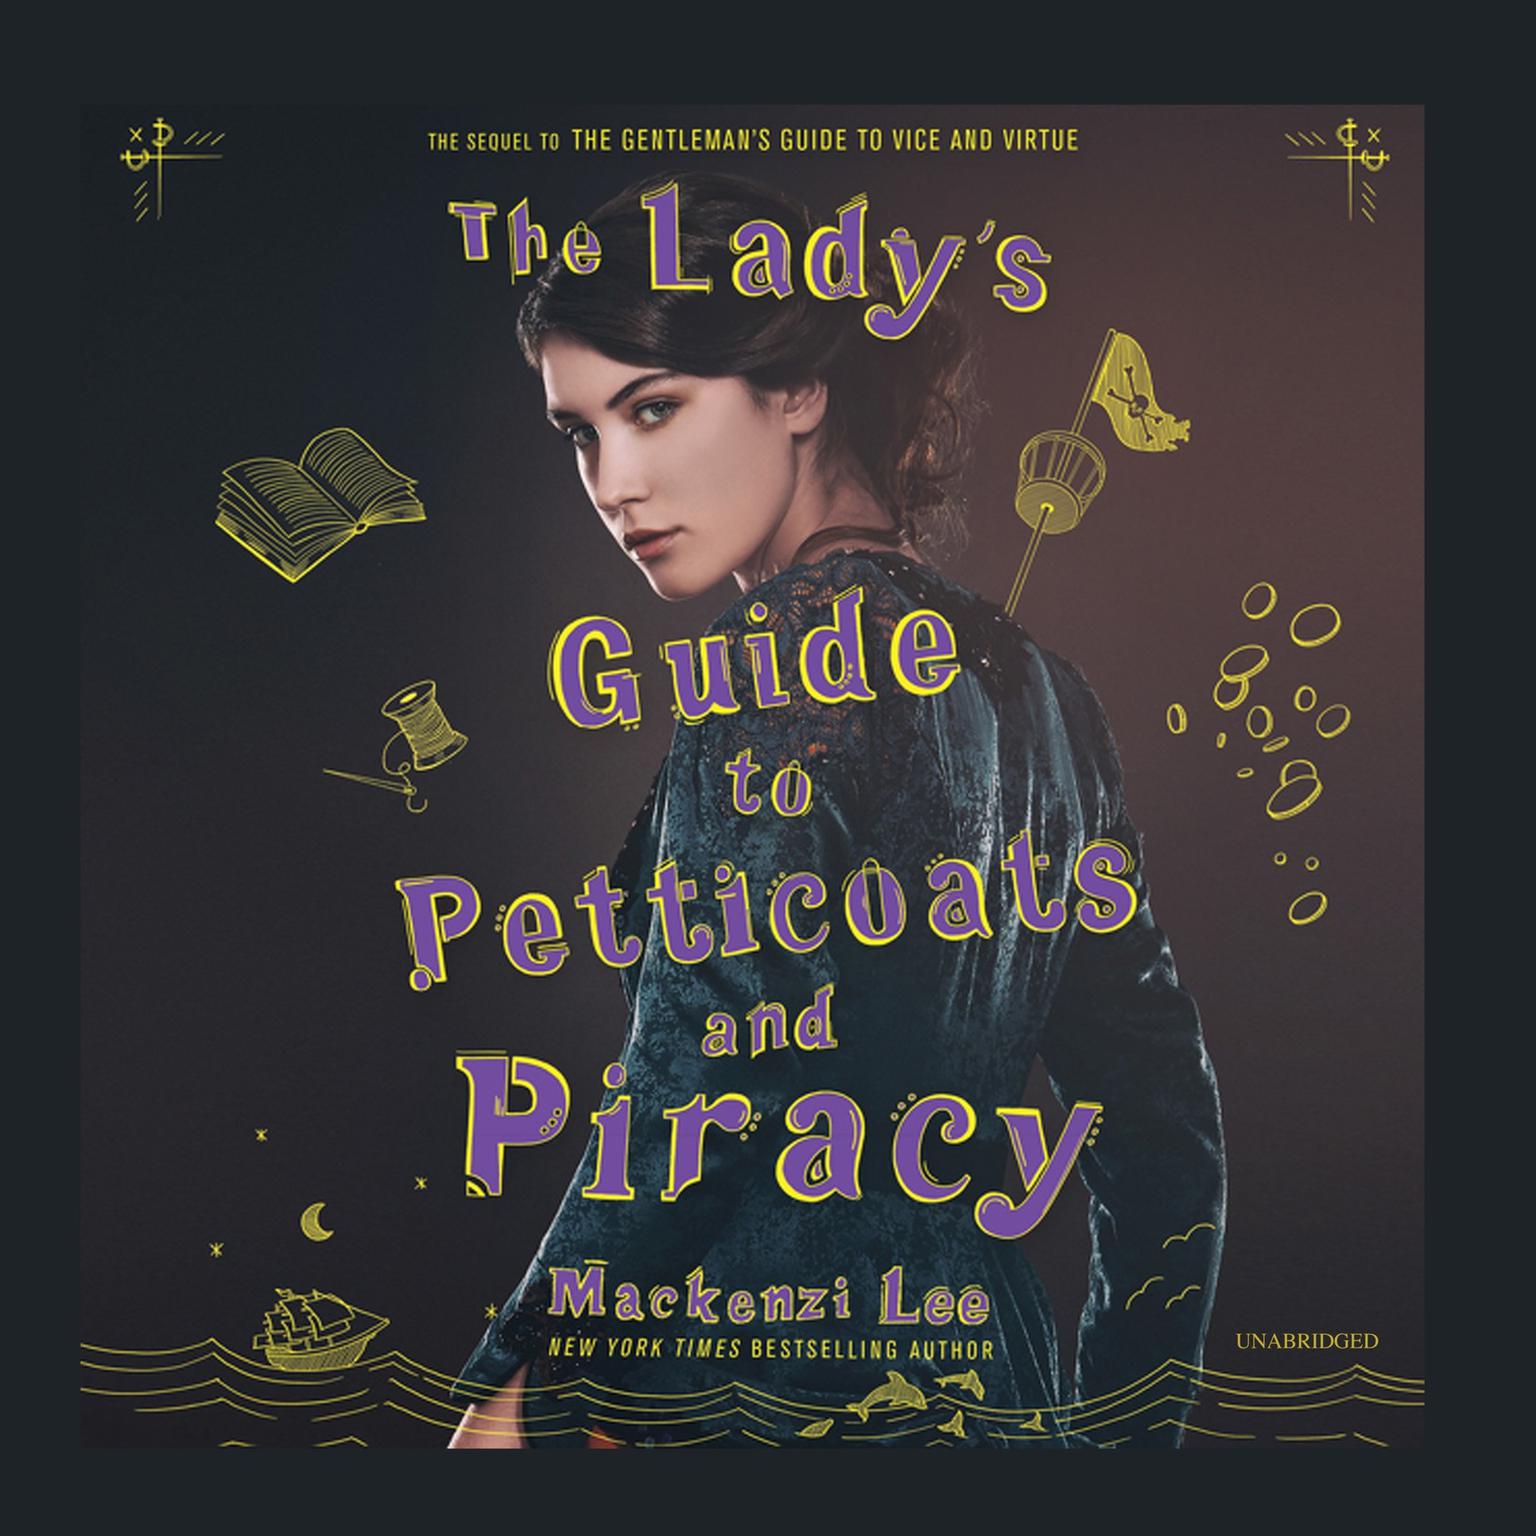 Mackenzi Lee: The Lady's Guide to Petticoats and Piracy (Hardcover, 2018, Katherine Tegen Books)